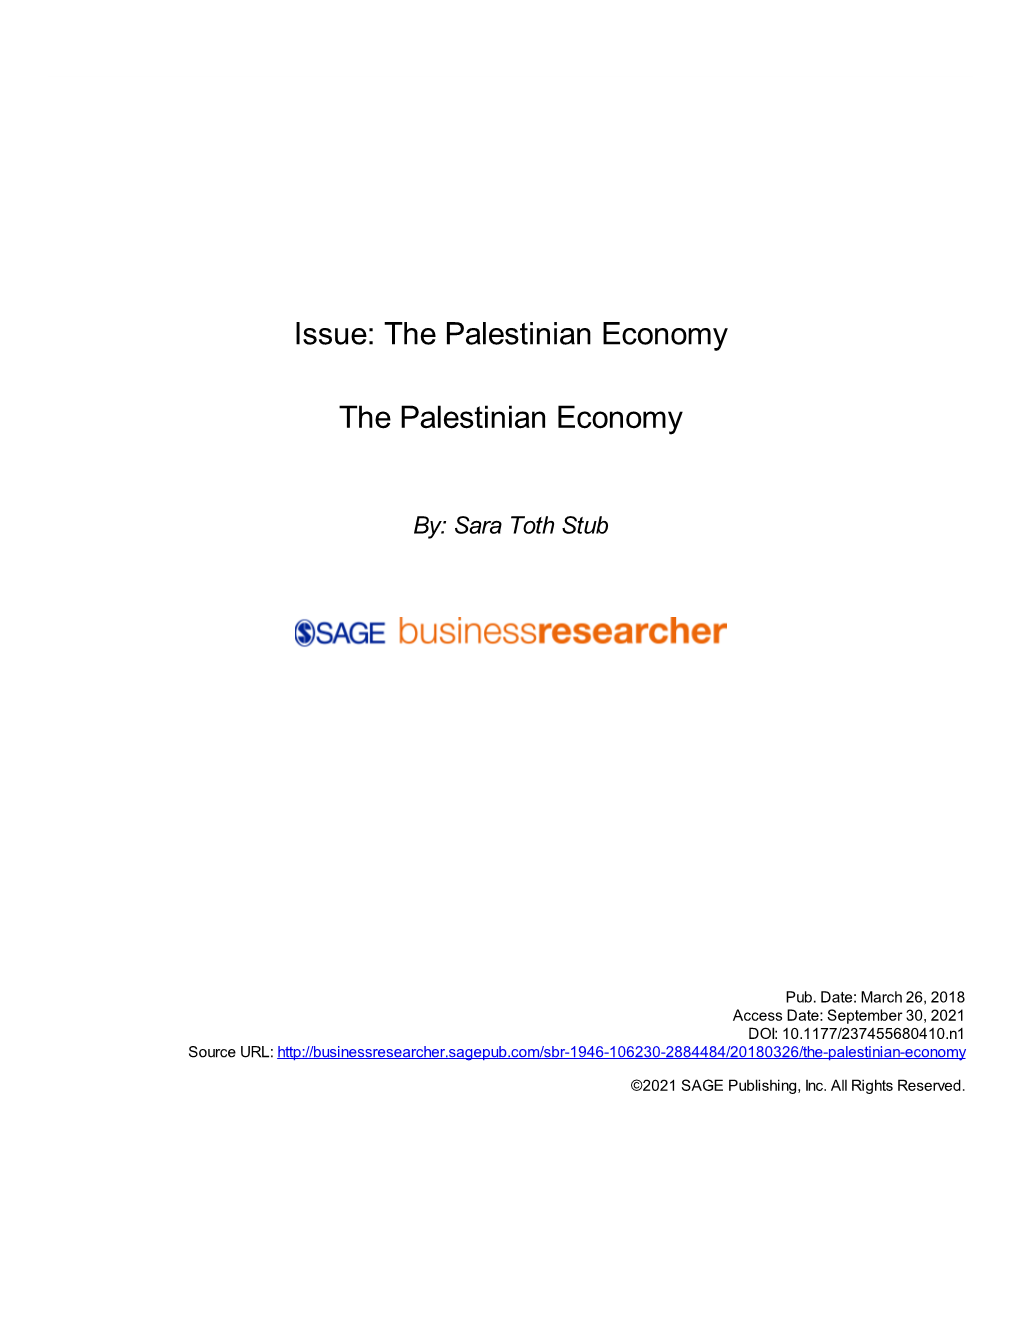 Issue: the Palestinian Economy the Palestinian Economy